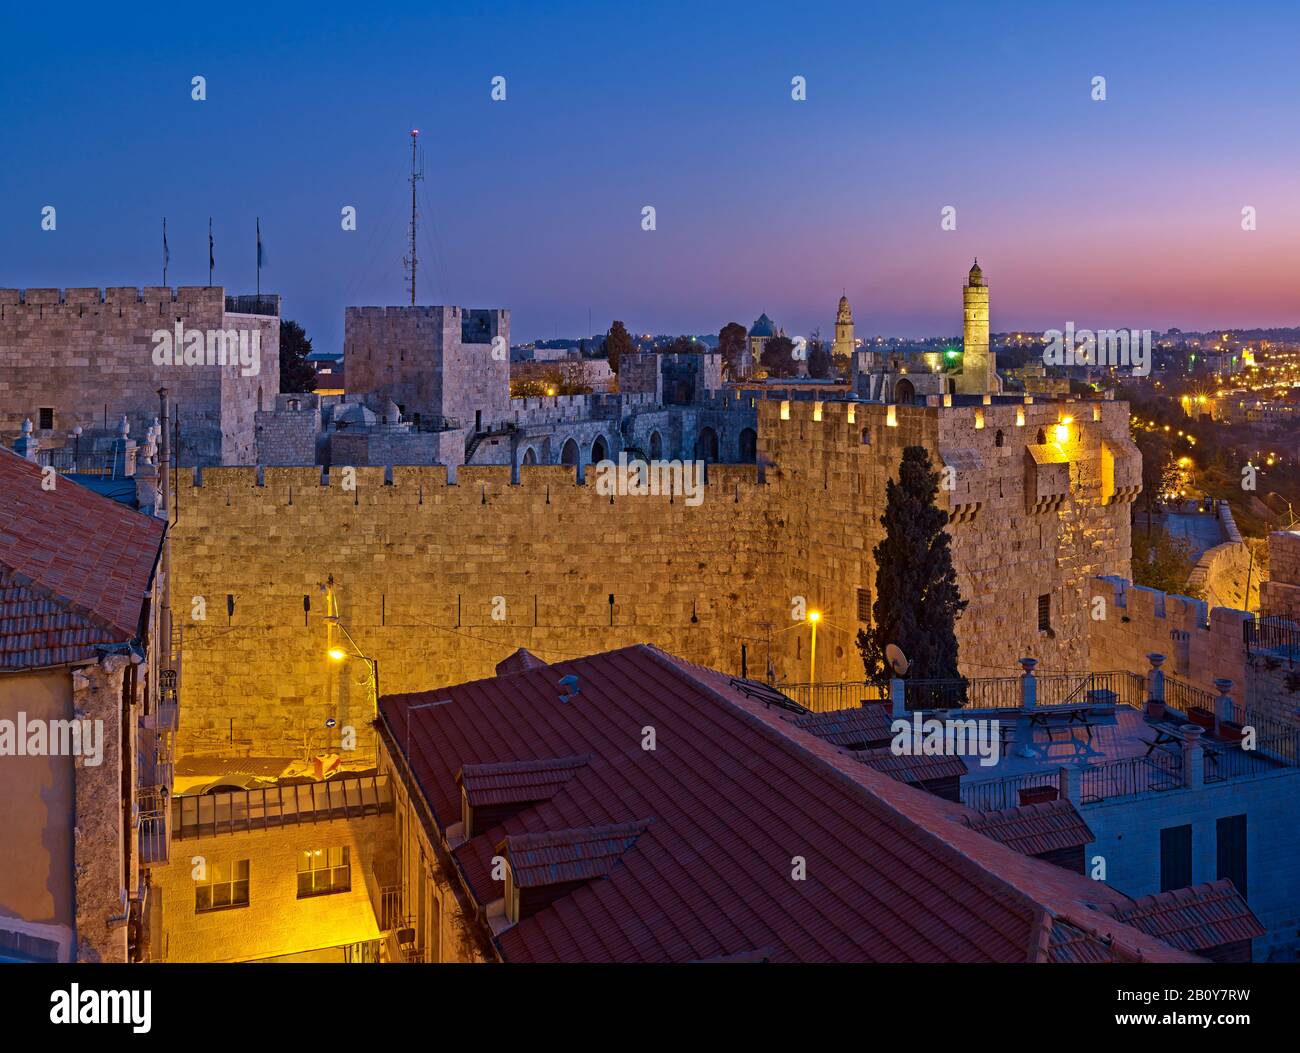 Citadel and Tower of David at Jaffa Gate in the old city of Jerusalem, Israel, Stock Photo